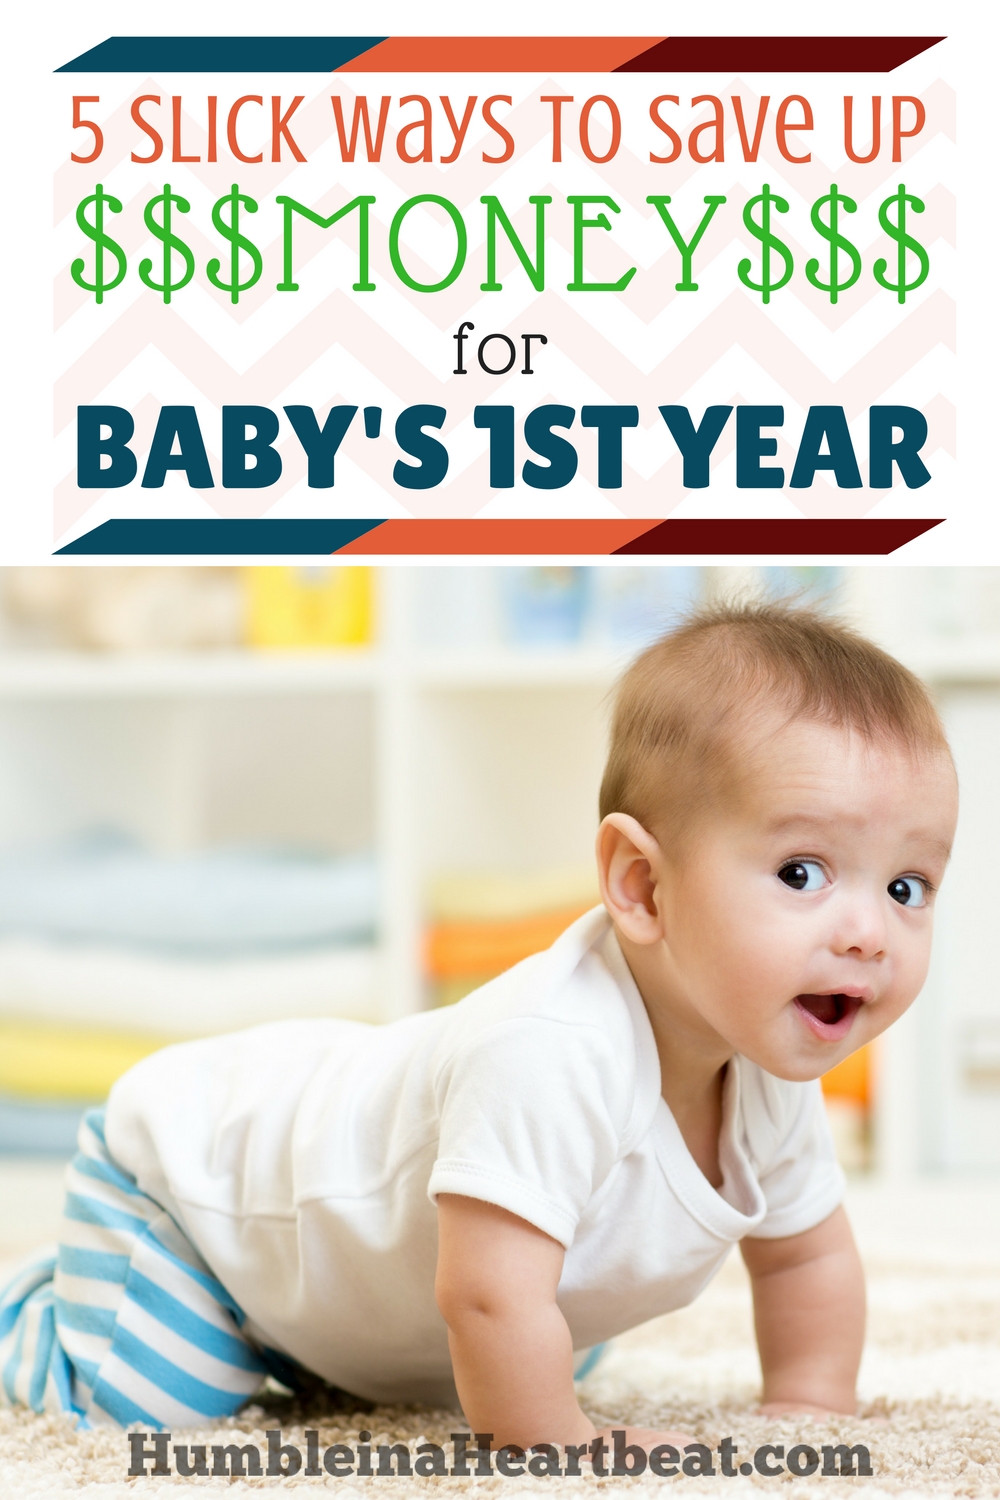 Don't put off having a baby just because of the money! Here are 5 of the best ways to save money for all the expenses you could incur in your baby's first year. There's no harm in having a plan!